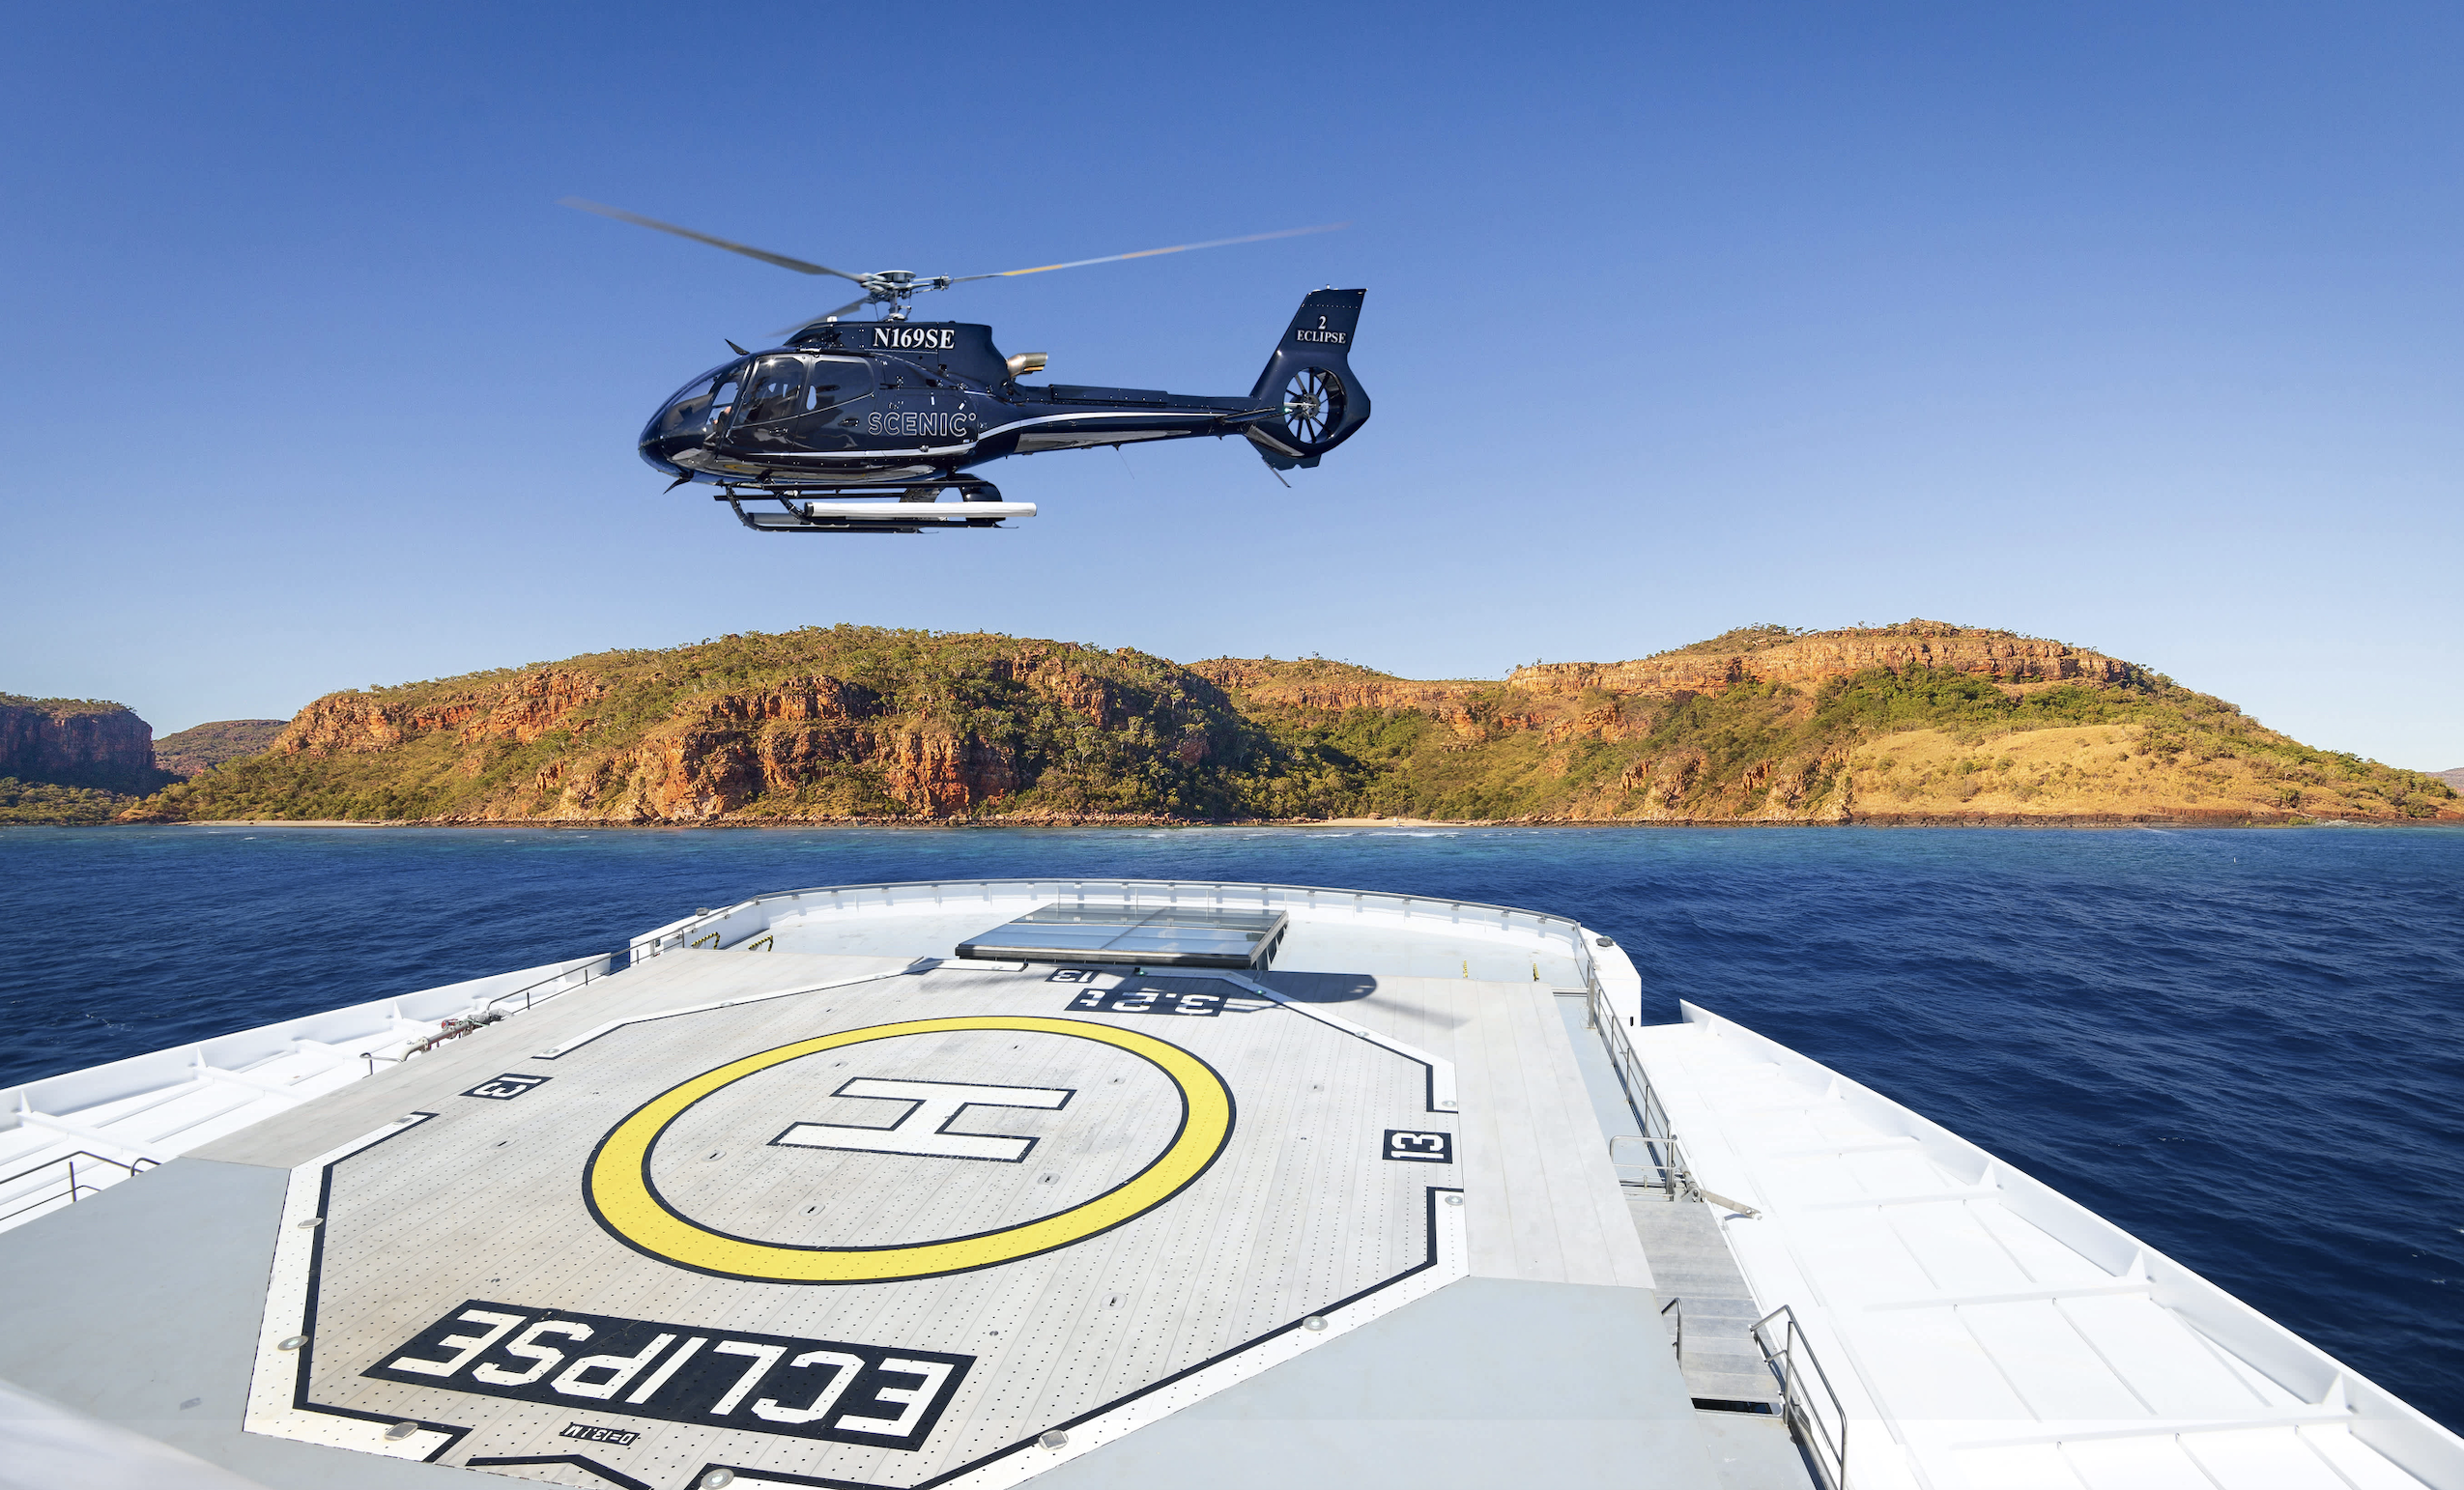 The helicopter on the Scenic Eclipse II